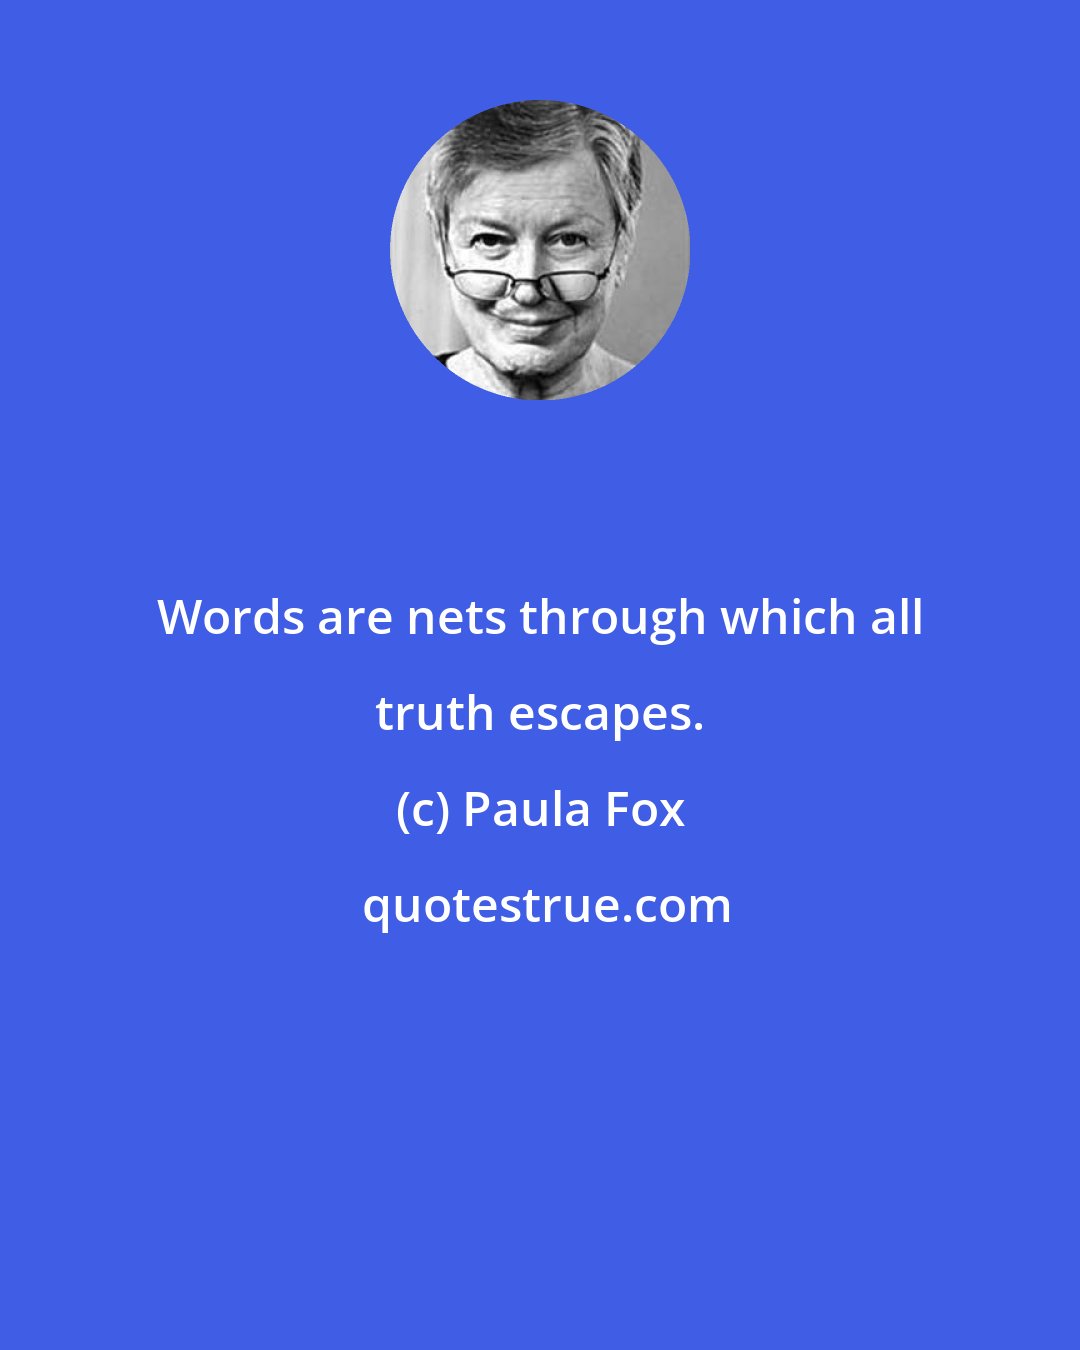 Paula Fox: Words are nets through which all truth escapes.